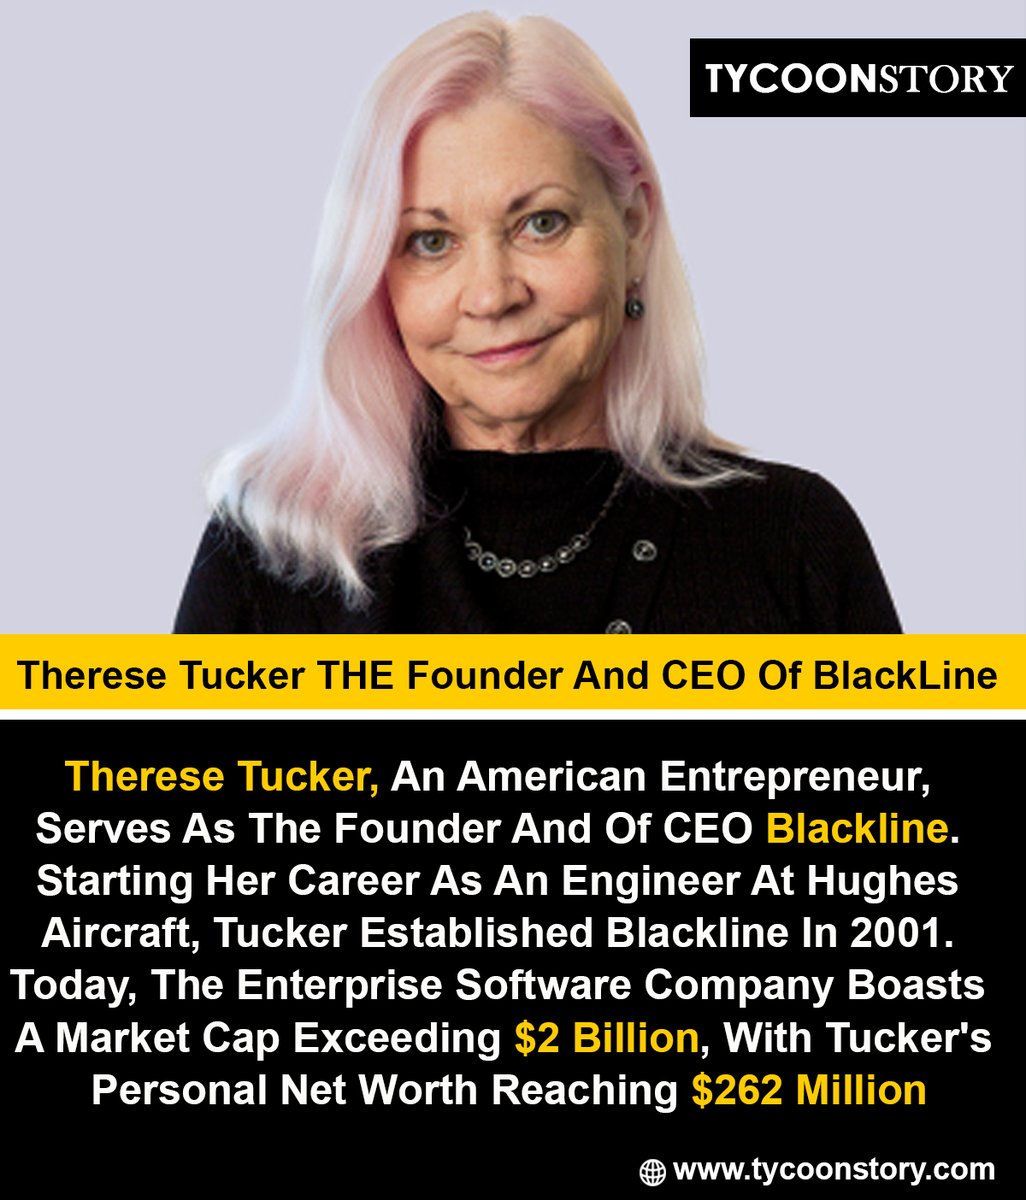 Tucker THE Founder And CEO Of BlackLine

#ThereseTucker #BlackLineFounder #BlackLineCEO
#TechInnovation #FinanceAutomation #AccountingSolutions #CloudSoftware #FinancialTransformation #SaaSLeader
#DigitalFinance @Theresetucker18  @BlackLine 
tycoonstory.com